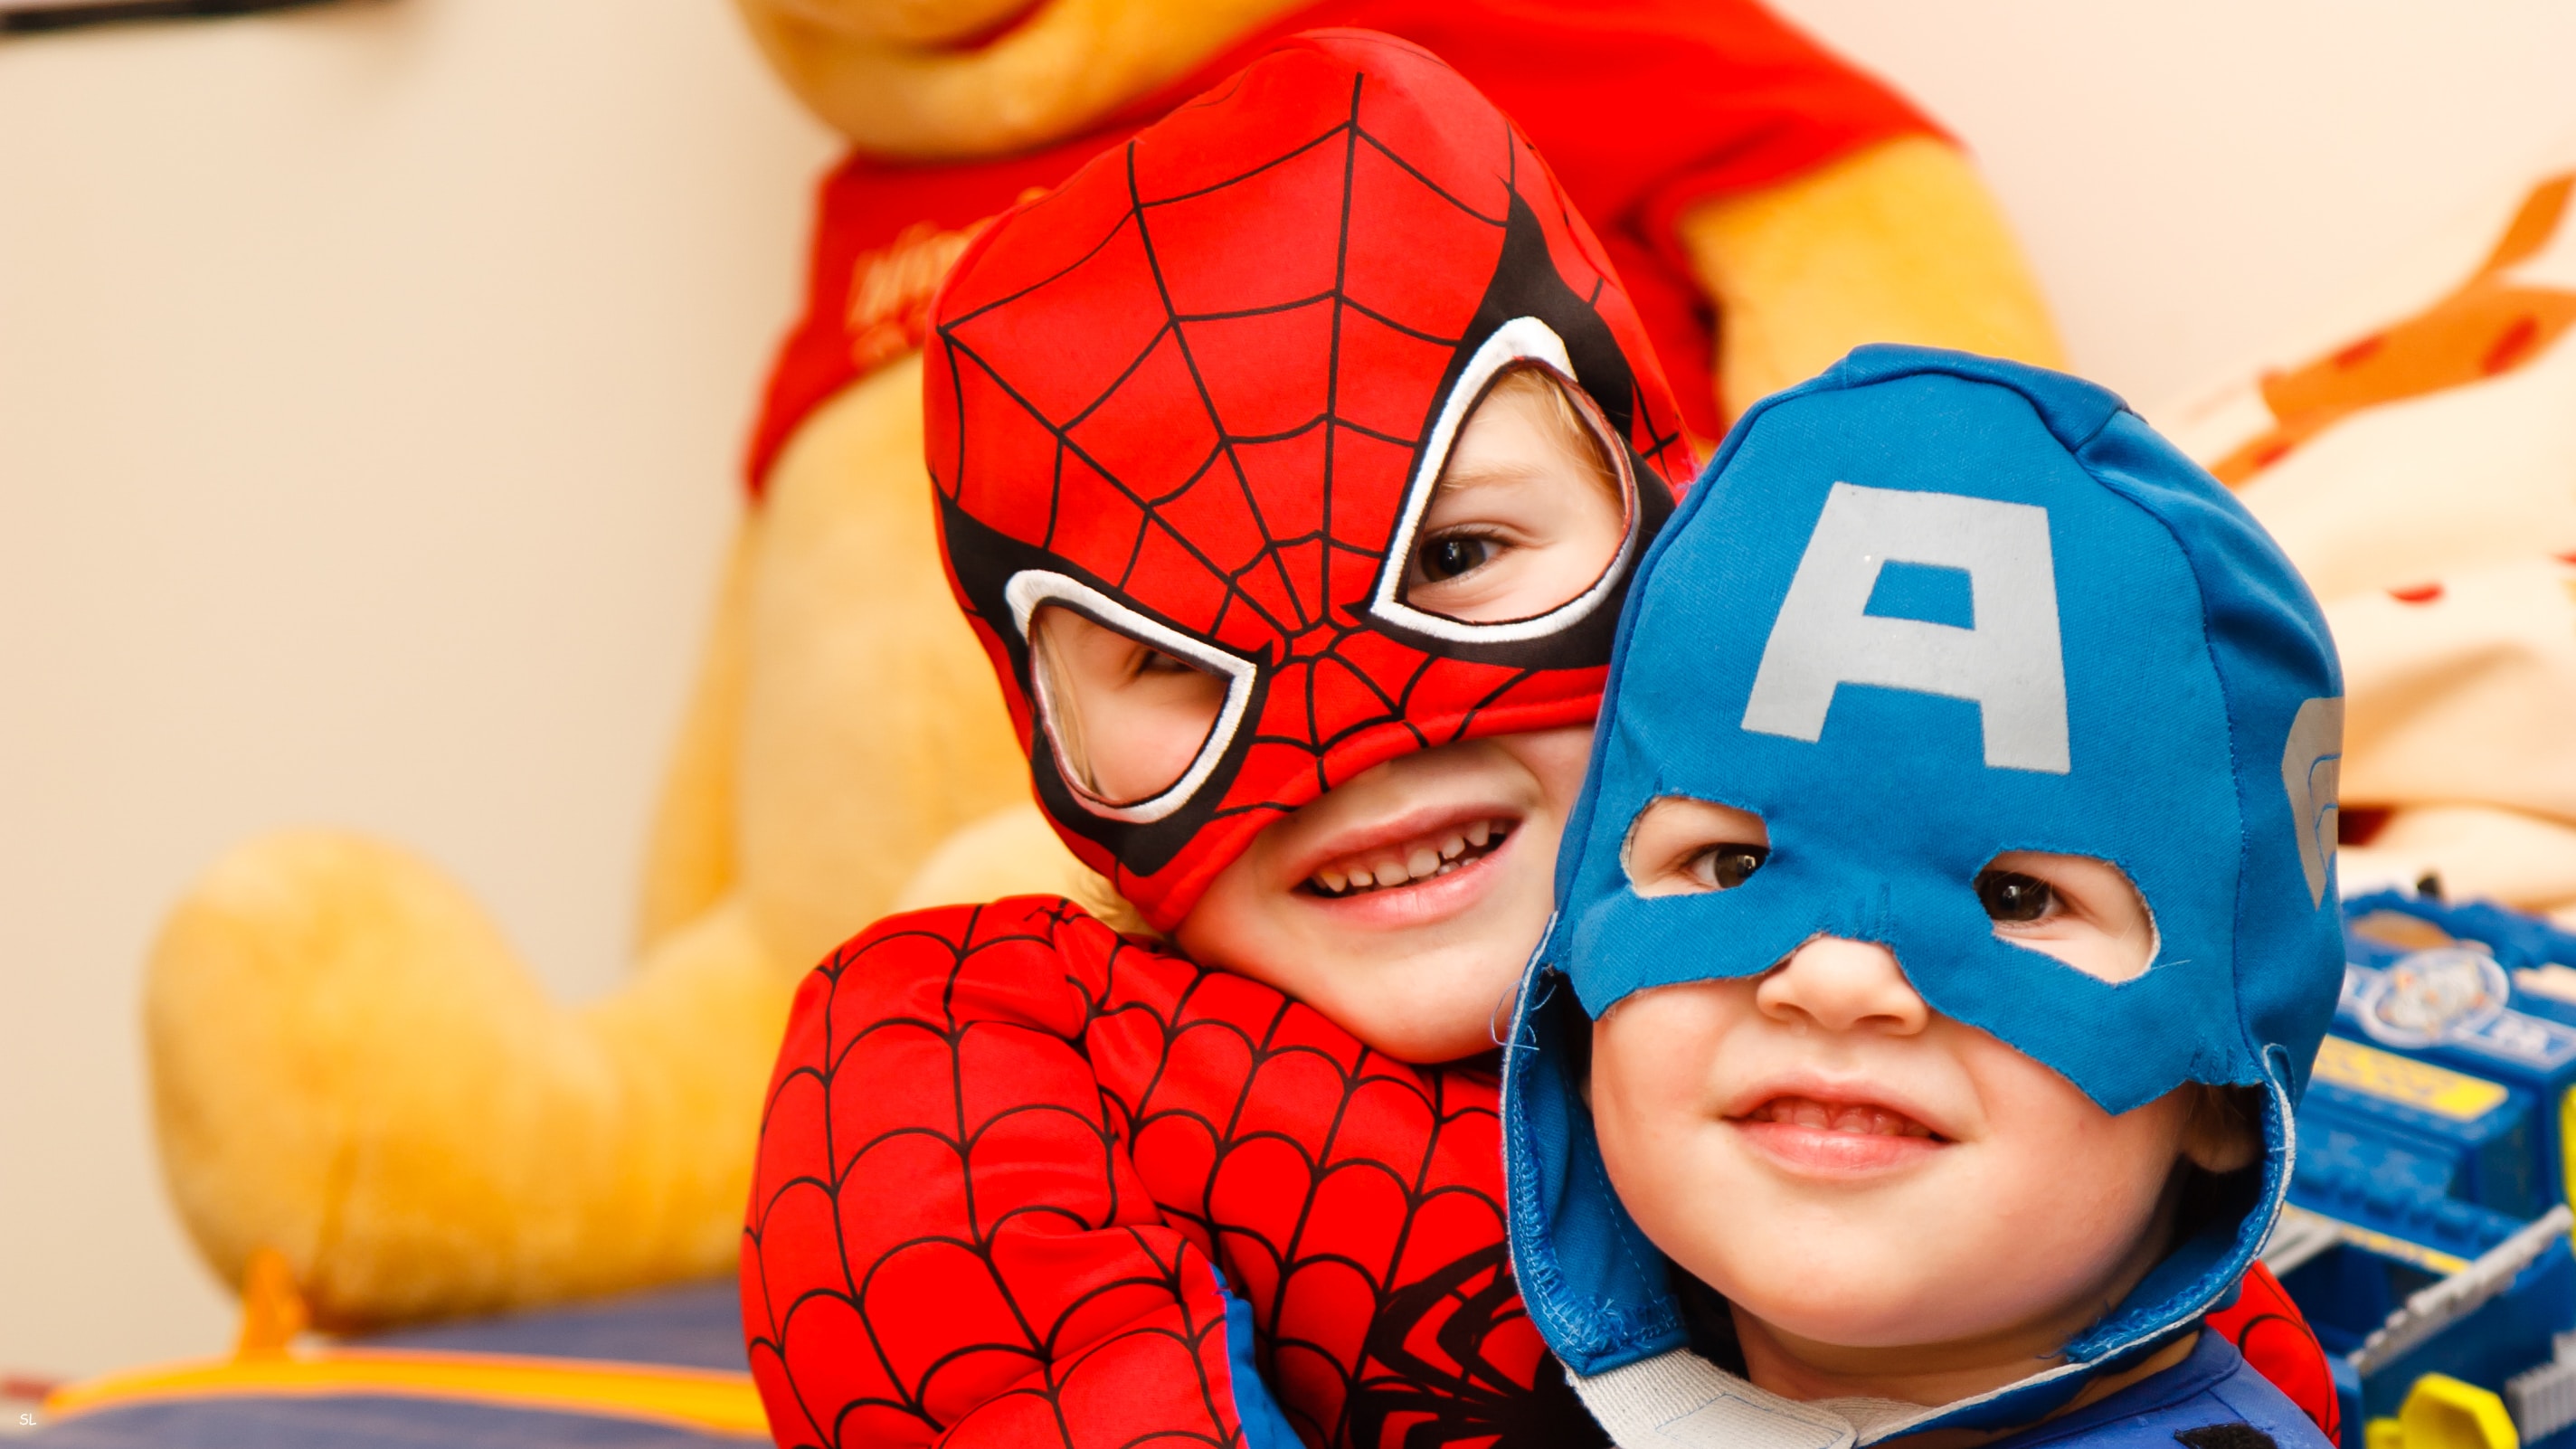 Dressing Up to Learn About Ourselves: How Halloween Can Prepare Kids for All Saints Day